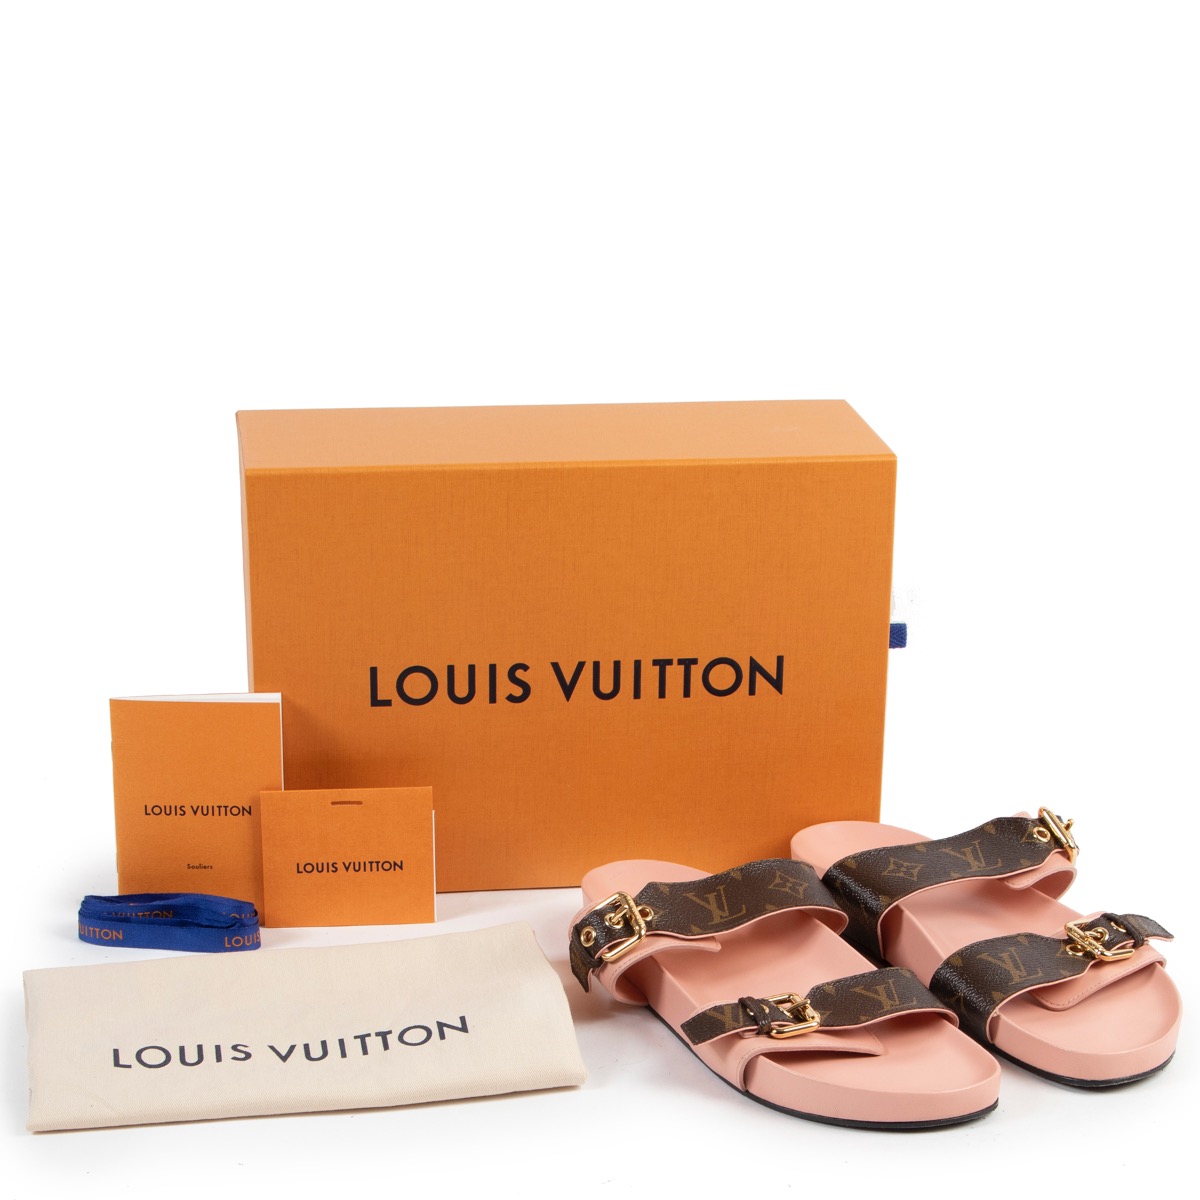 Louis Vuitton - Authenticated Bom Dia Sandal - Cloth Pink for Women, Very Good Condition